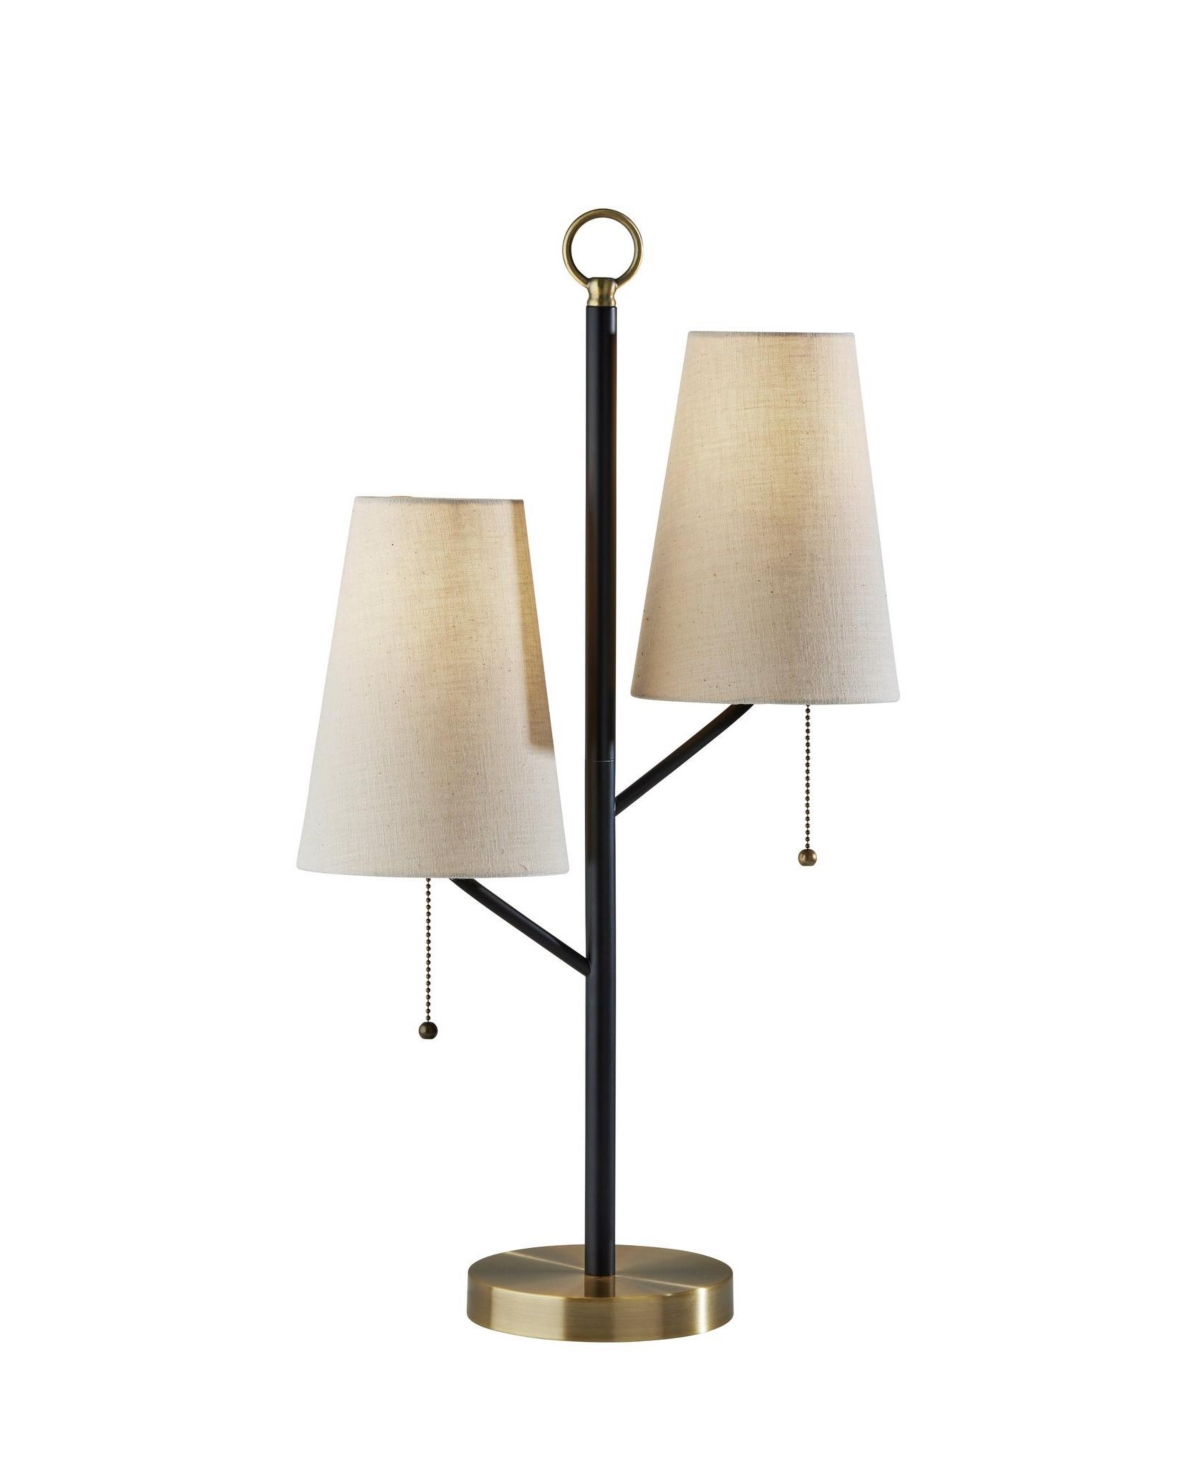 Adesso Daniel Table Lamp In Black With Antique-like Brass Accents